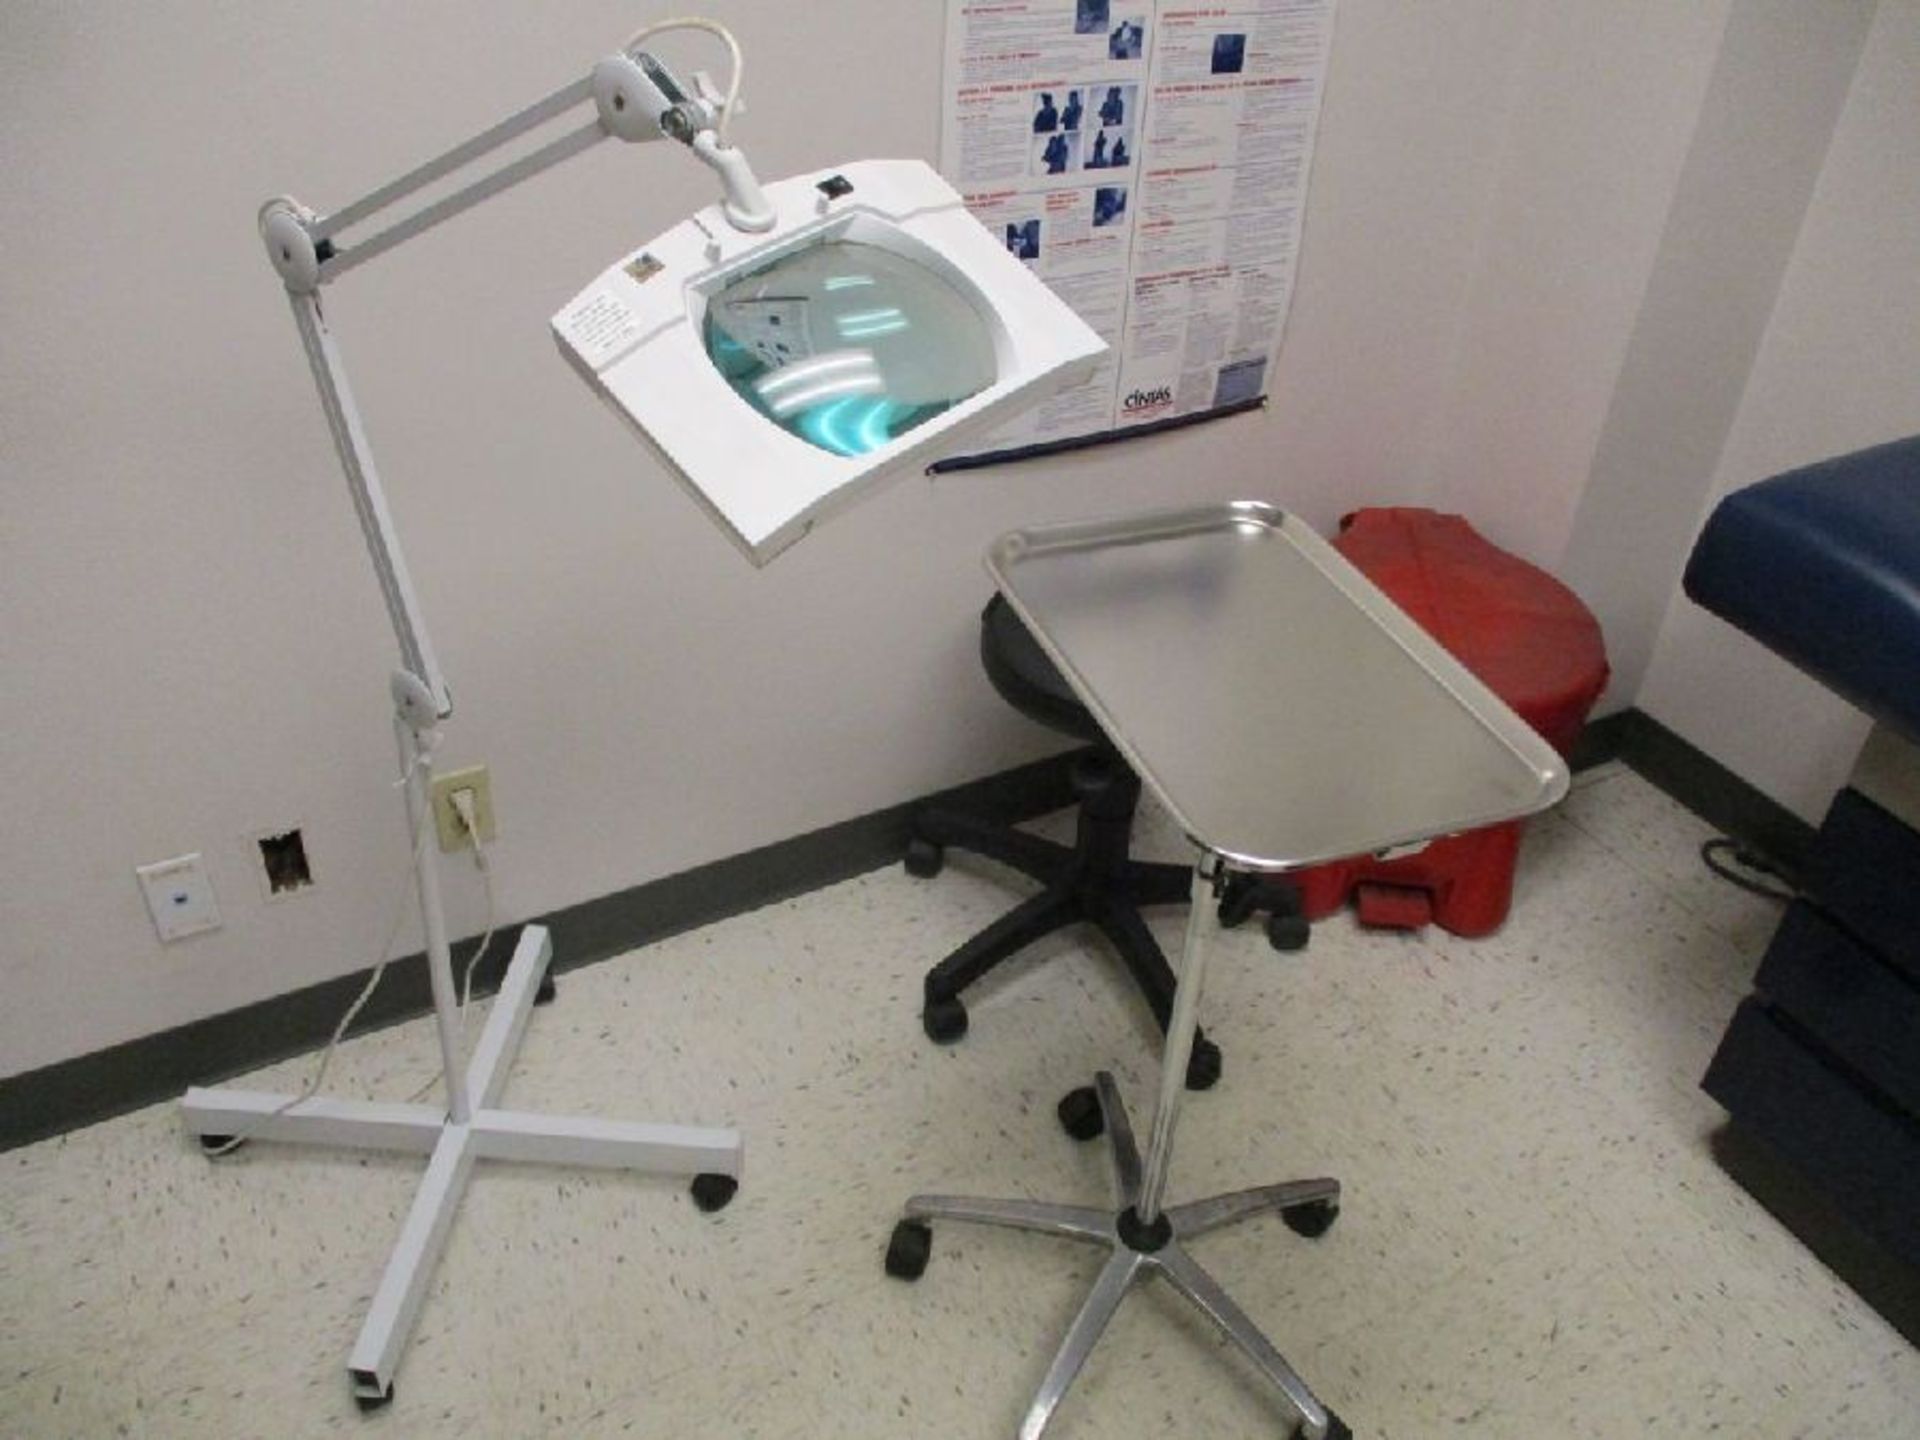 Contents of Medical Equipment Room